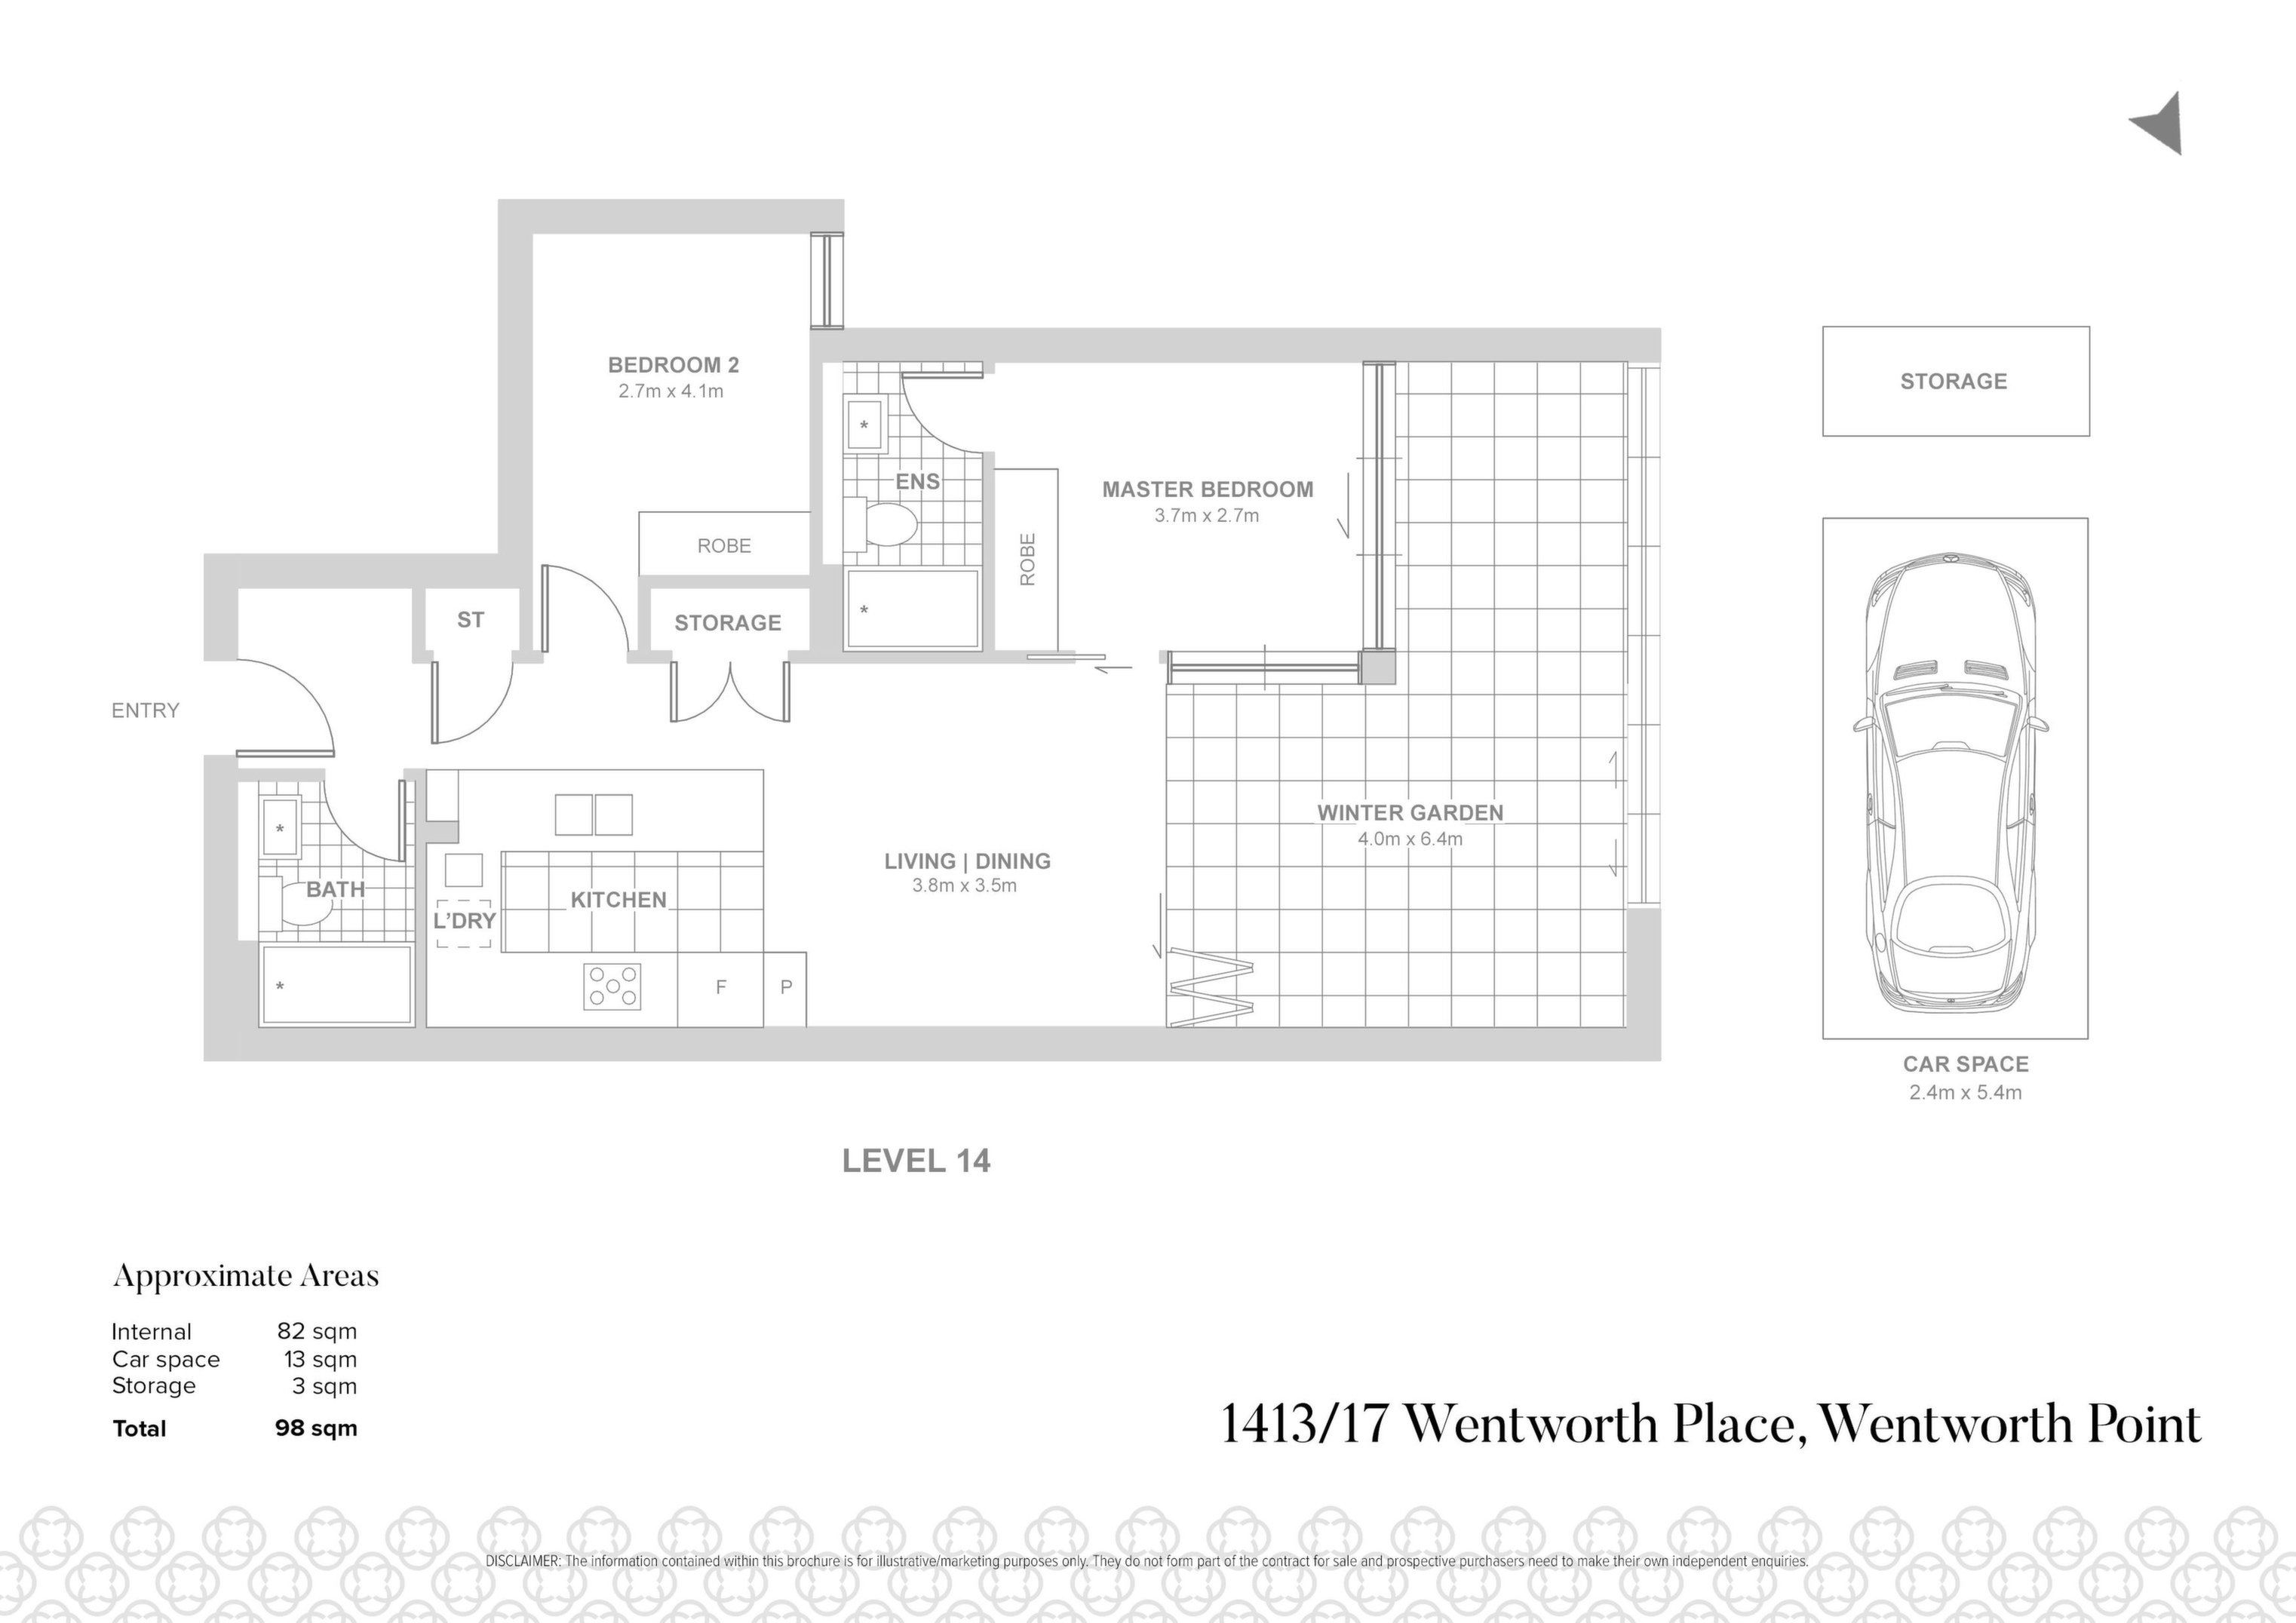 1413/17 Wentworth Place, Wentworth Point Sold by Chidiac Realty - floorplan